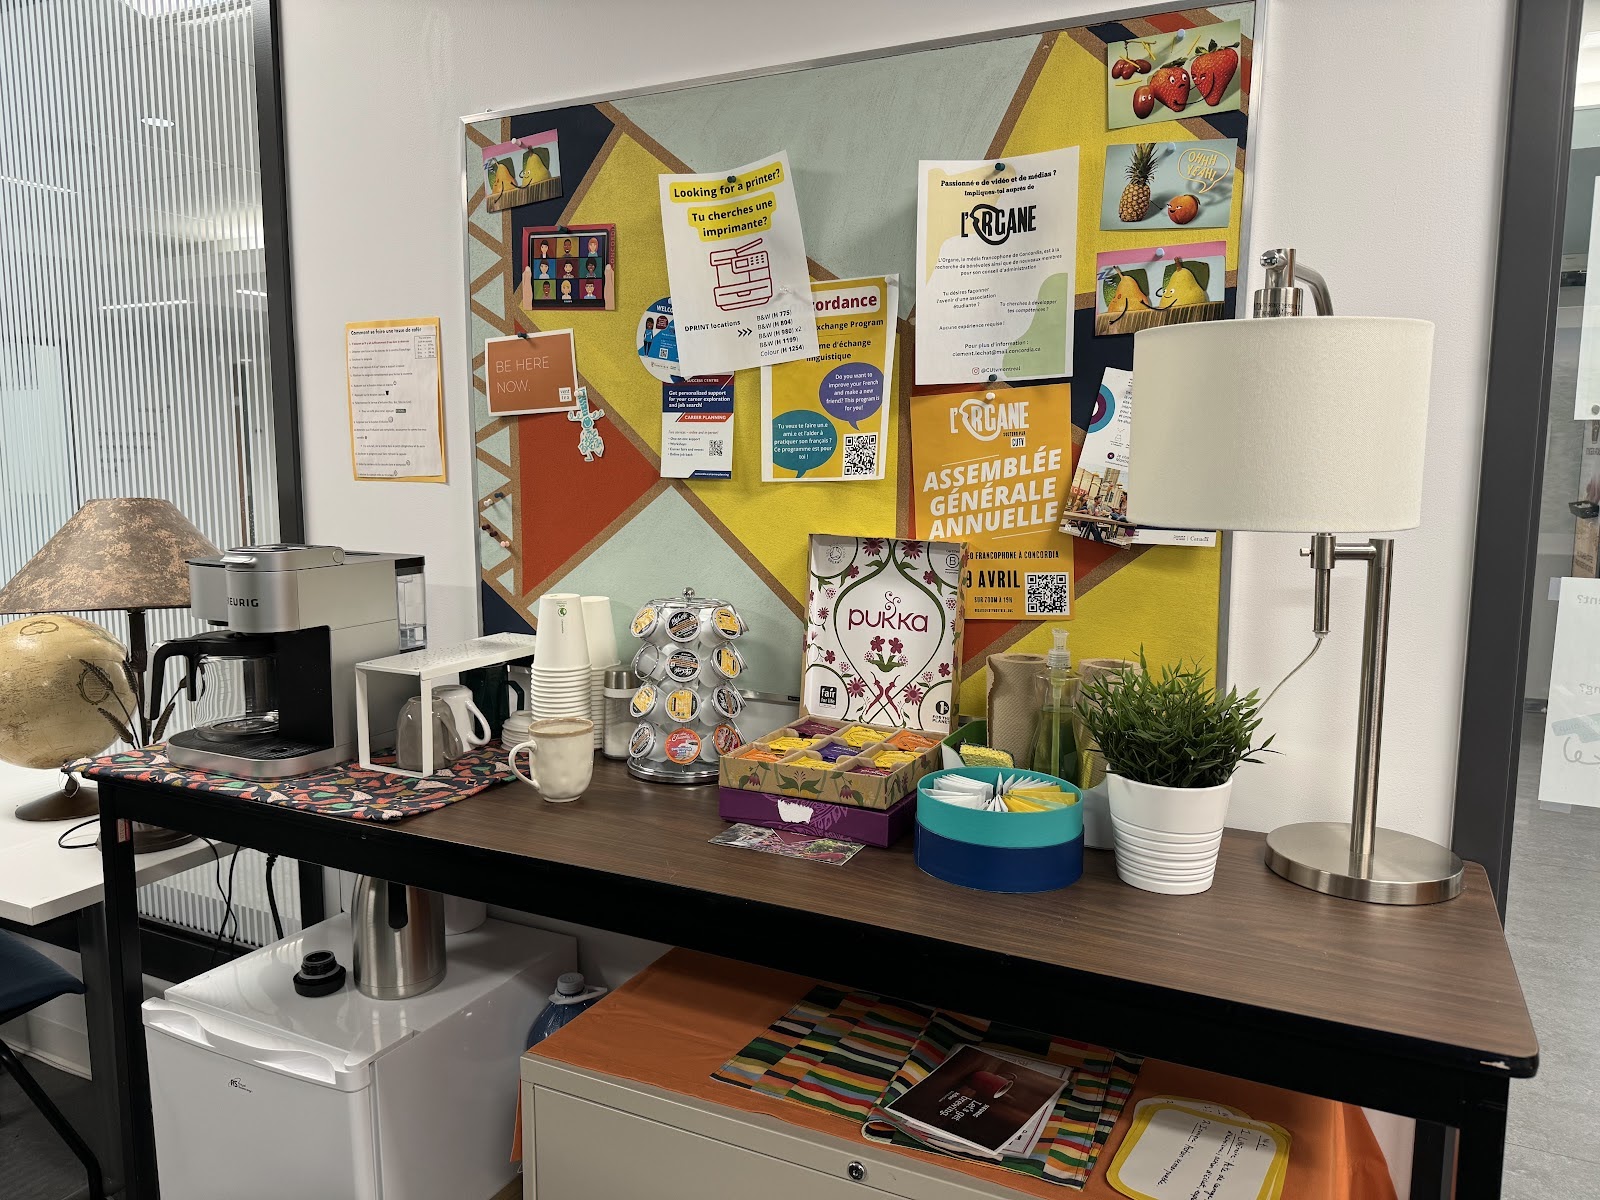 A table with a coffee maker, mugs, coffee pods, and tea sits in front of a colourful corkboard with various flyers and posters pinned to it.